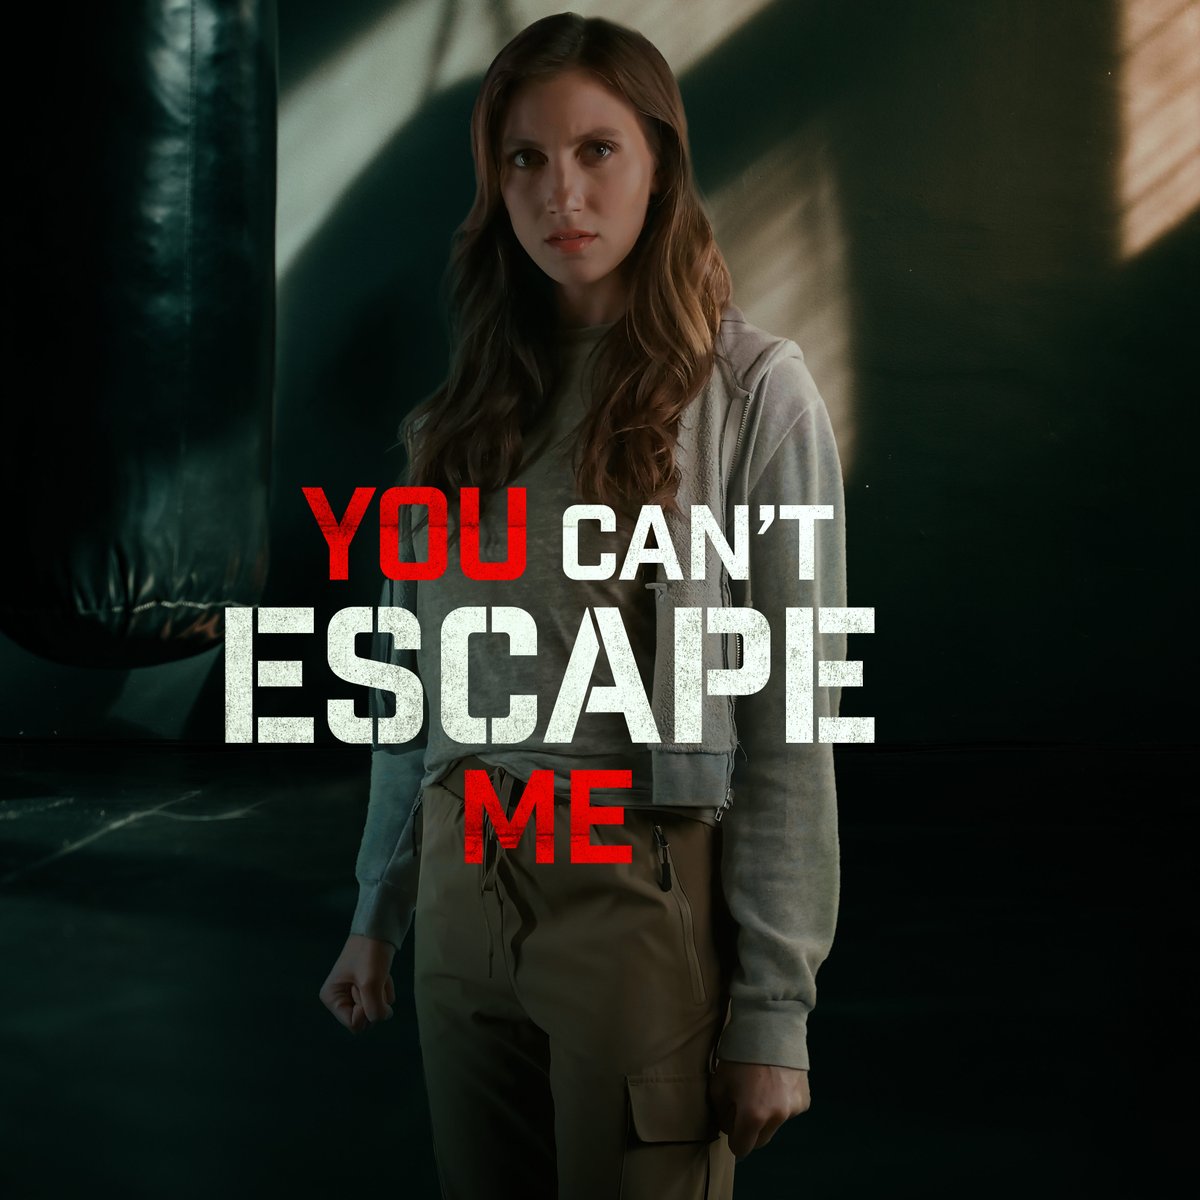 You can run, but you can't hide. Watch #YouCantEscapeMe tonight at 8/7c!